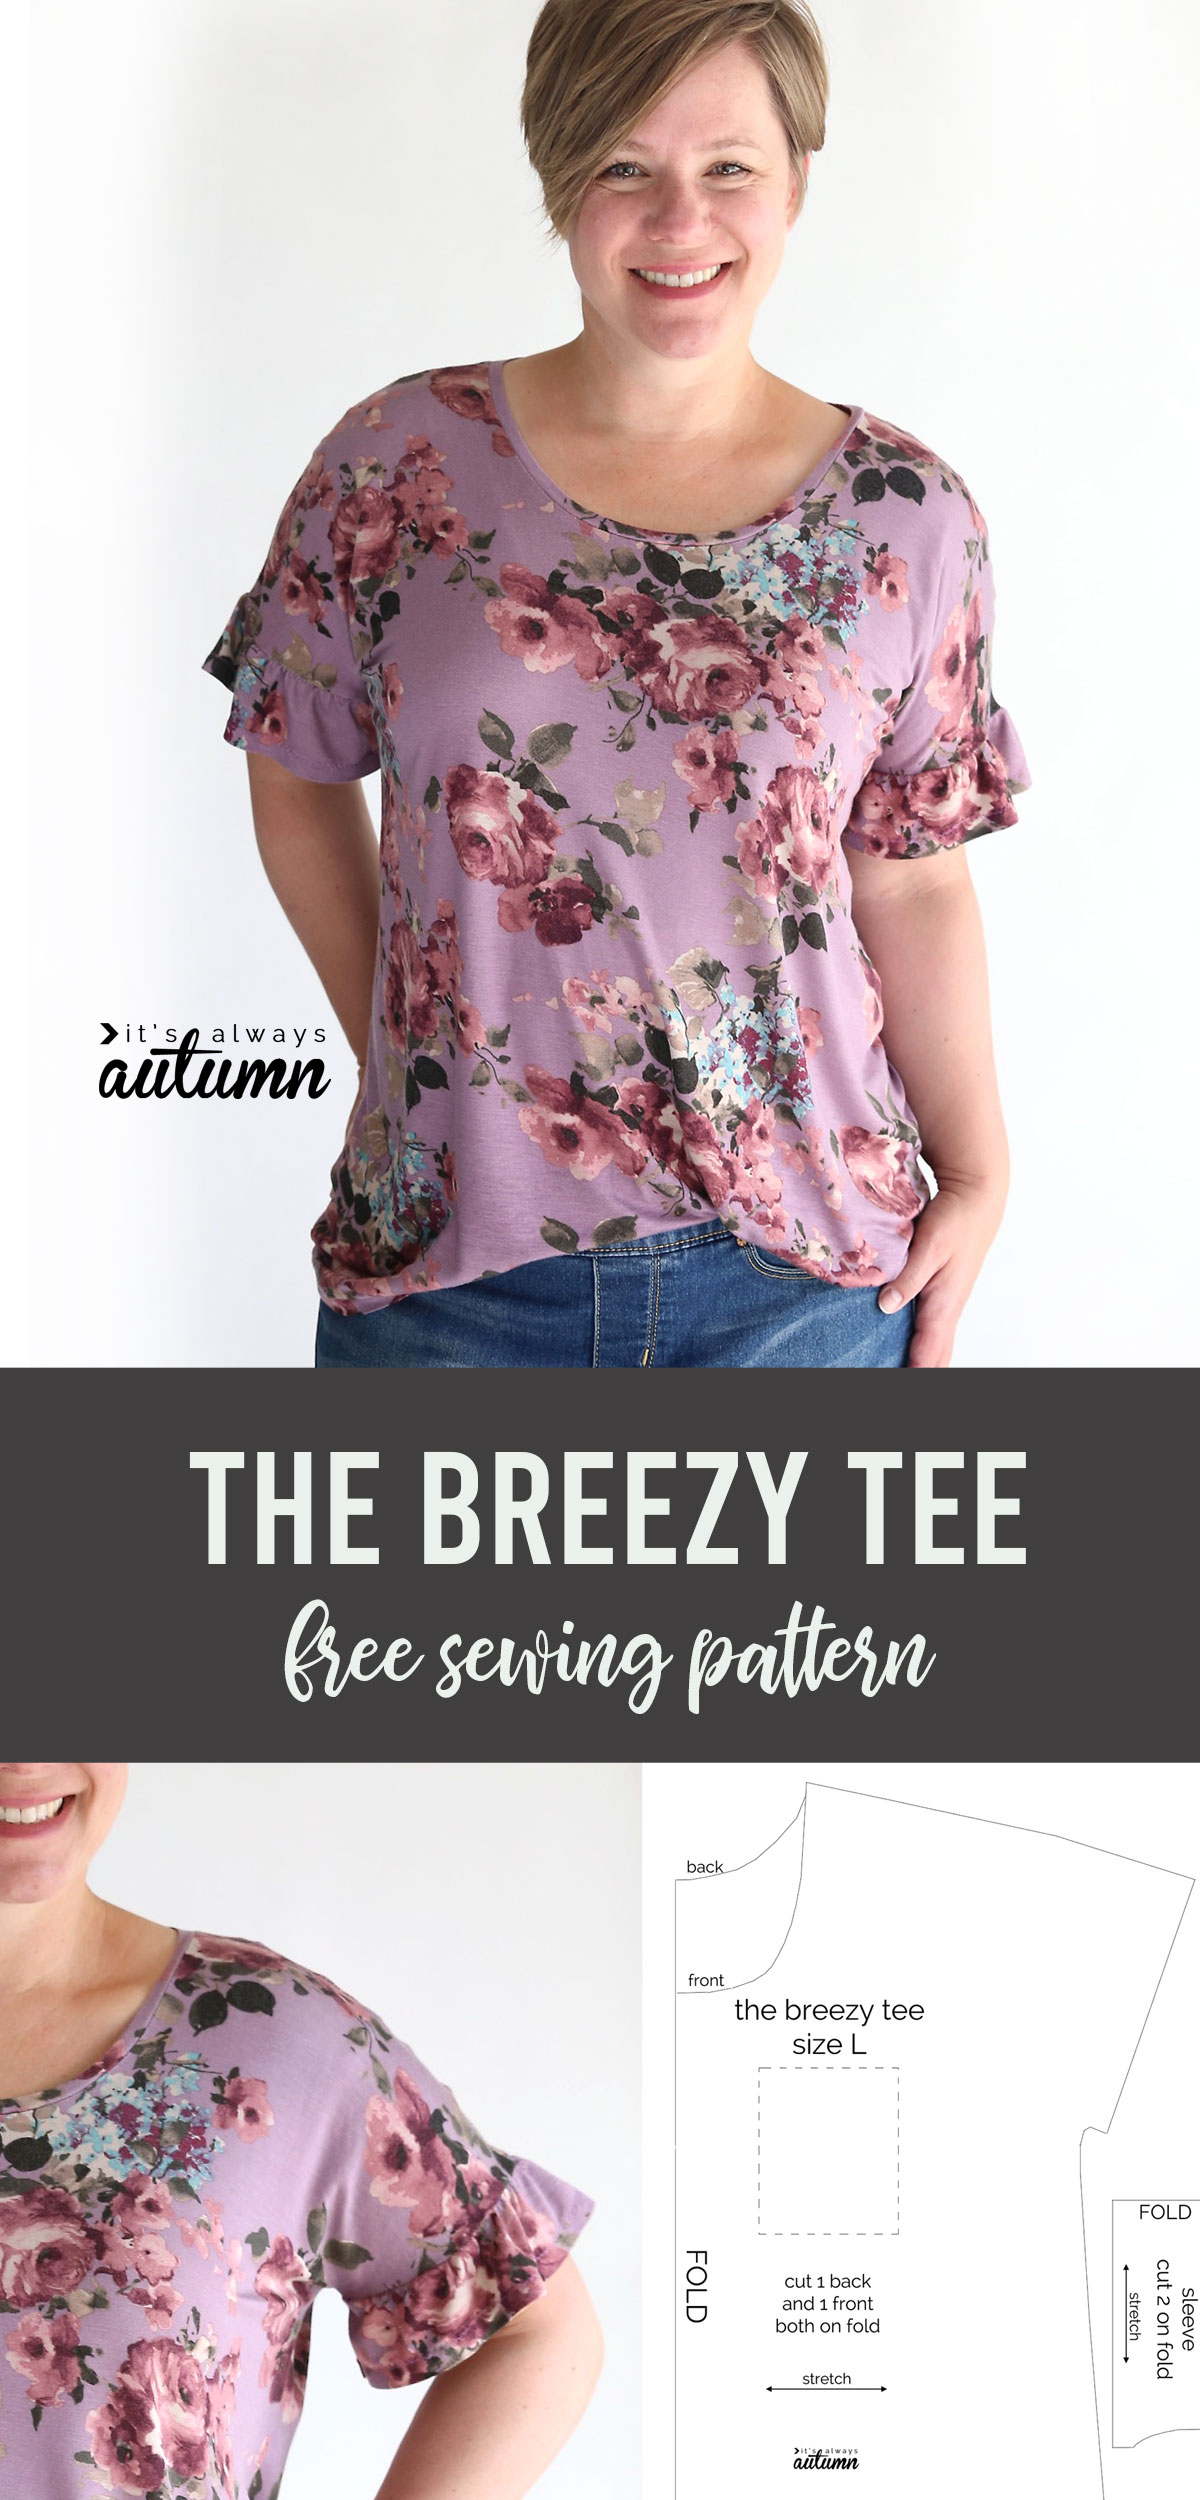 The breezy tee sewing pattern is roomy and comfortable for summer, and a flutter sleeve makes it even cuter